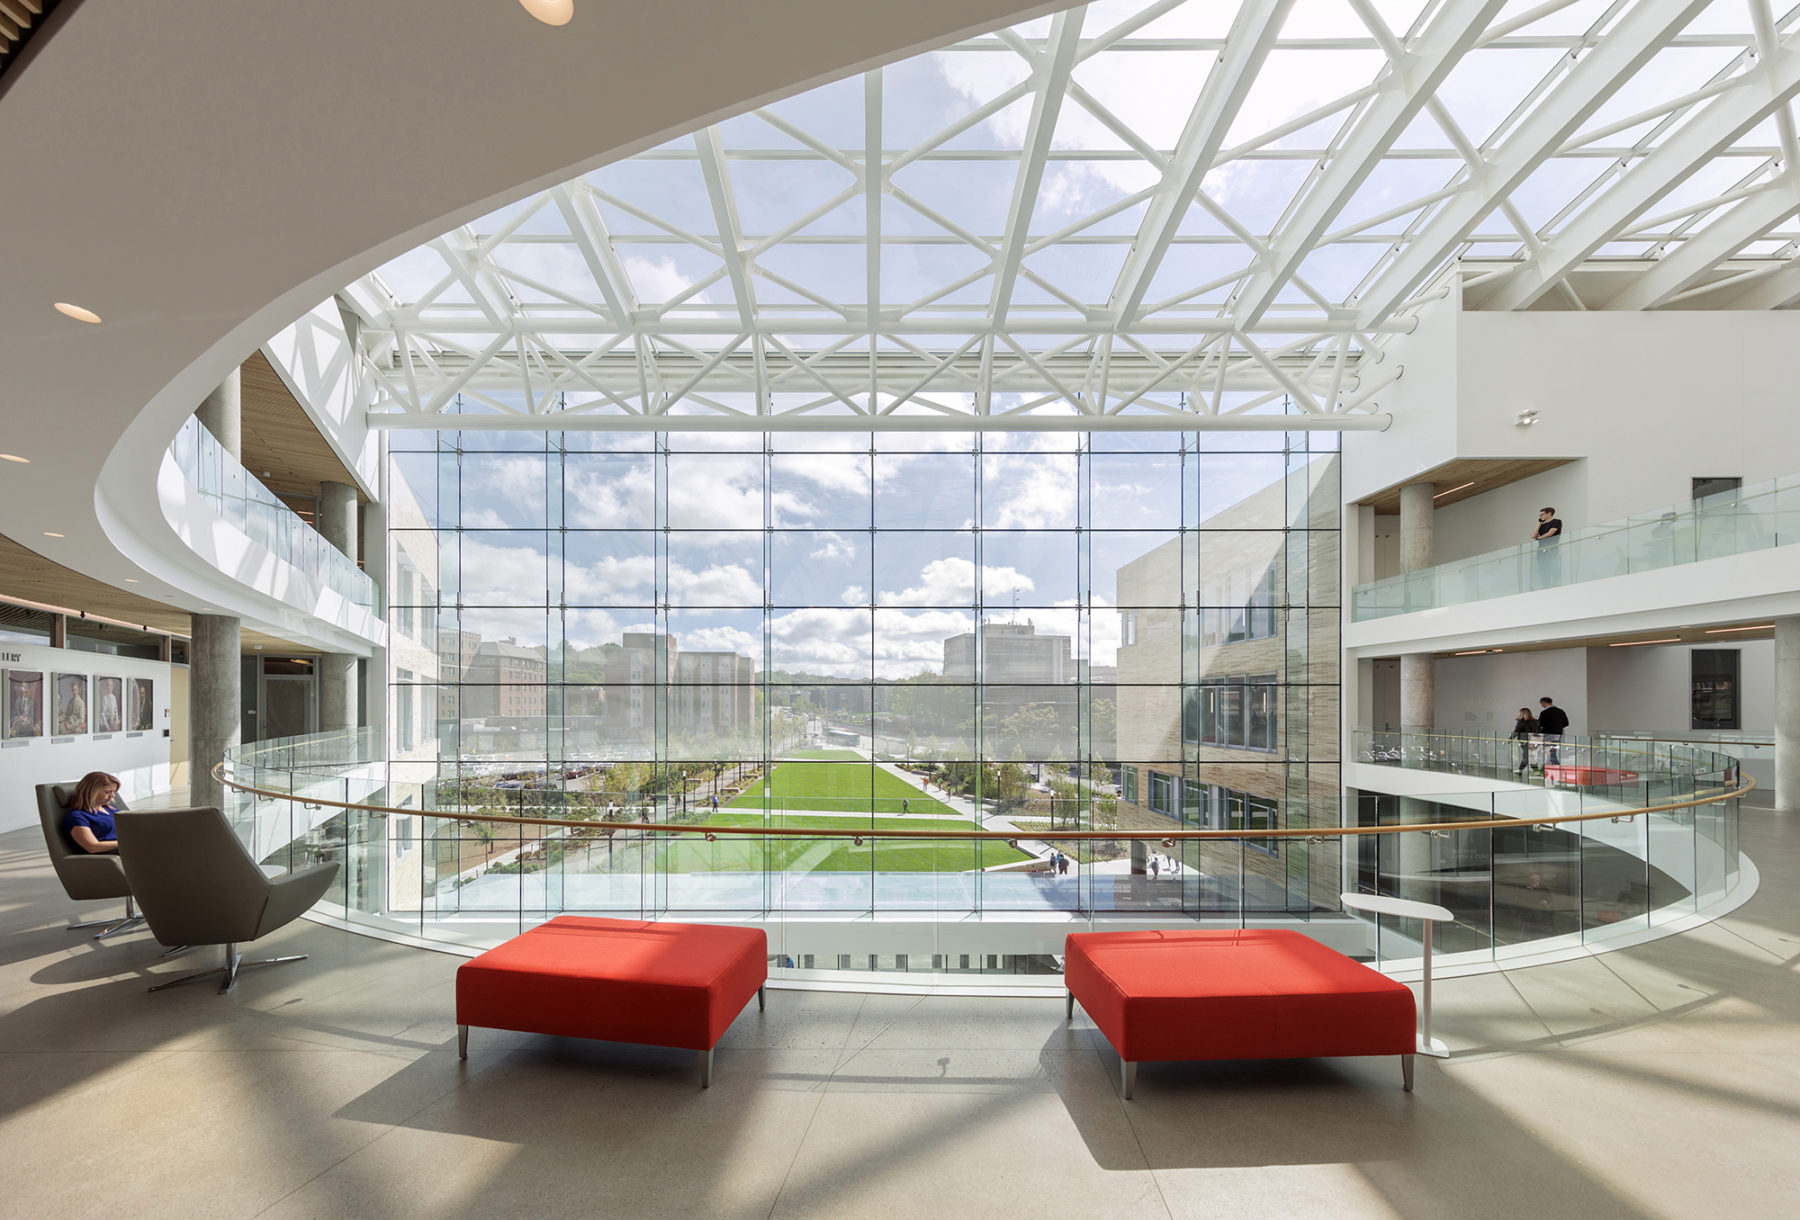 Interior view of the Tepper Quadrangle looking out towards the front lawn with two red sofas in the middle.